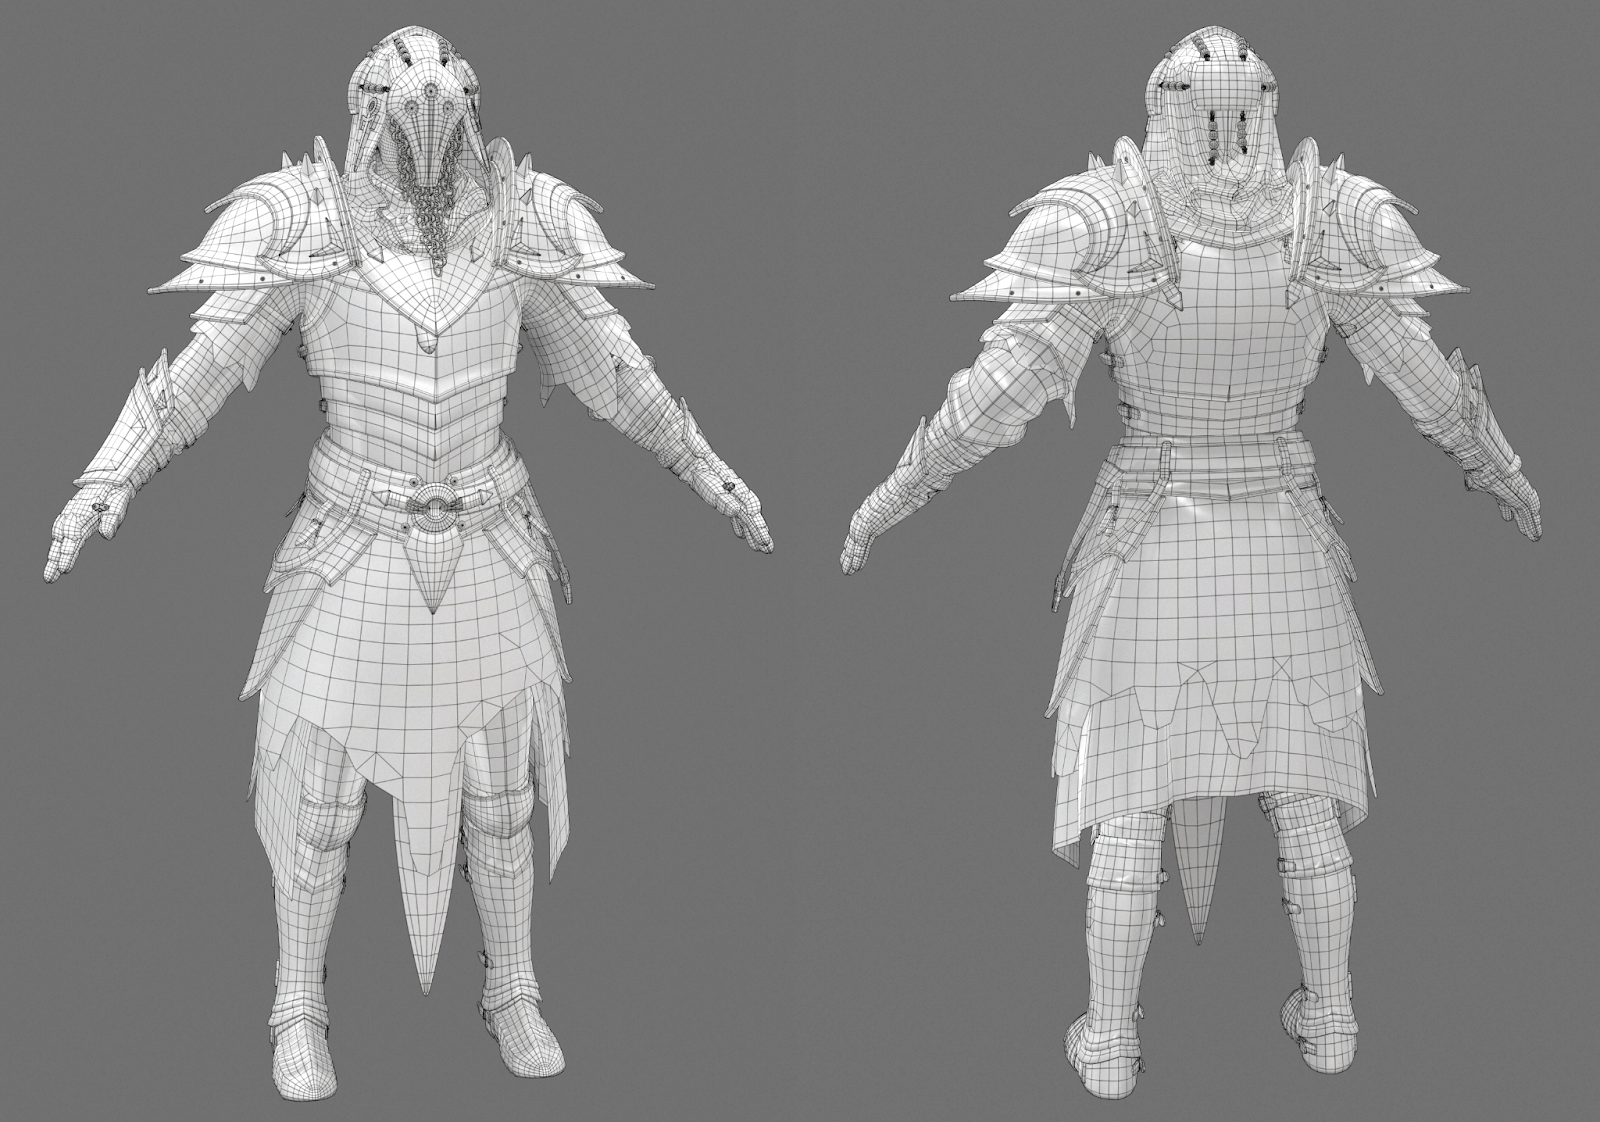 The low-poly version of the character